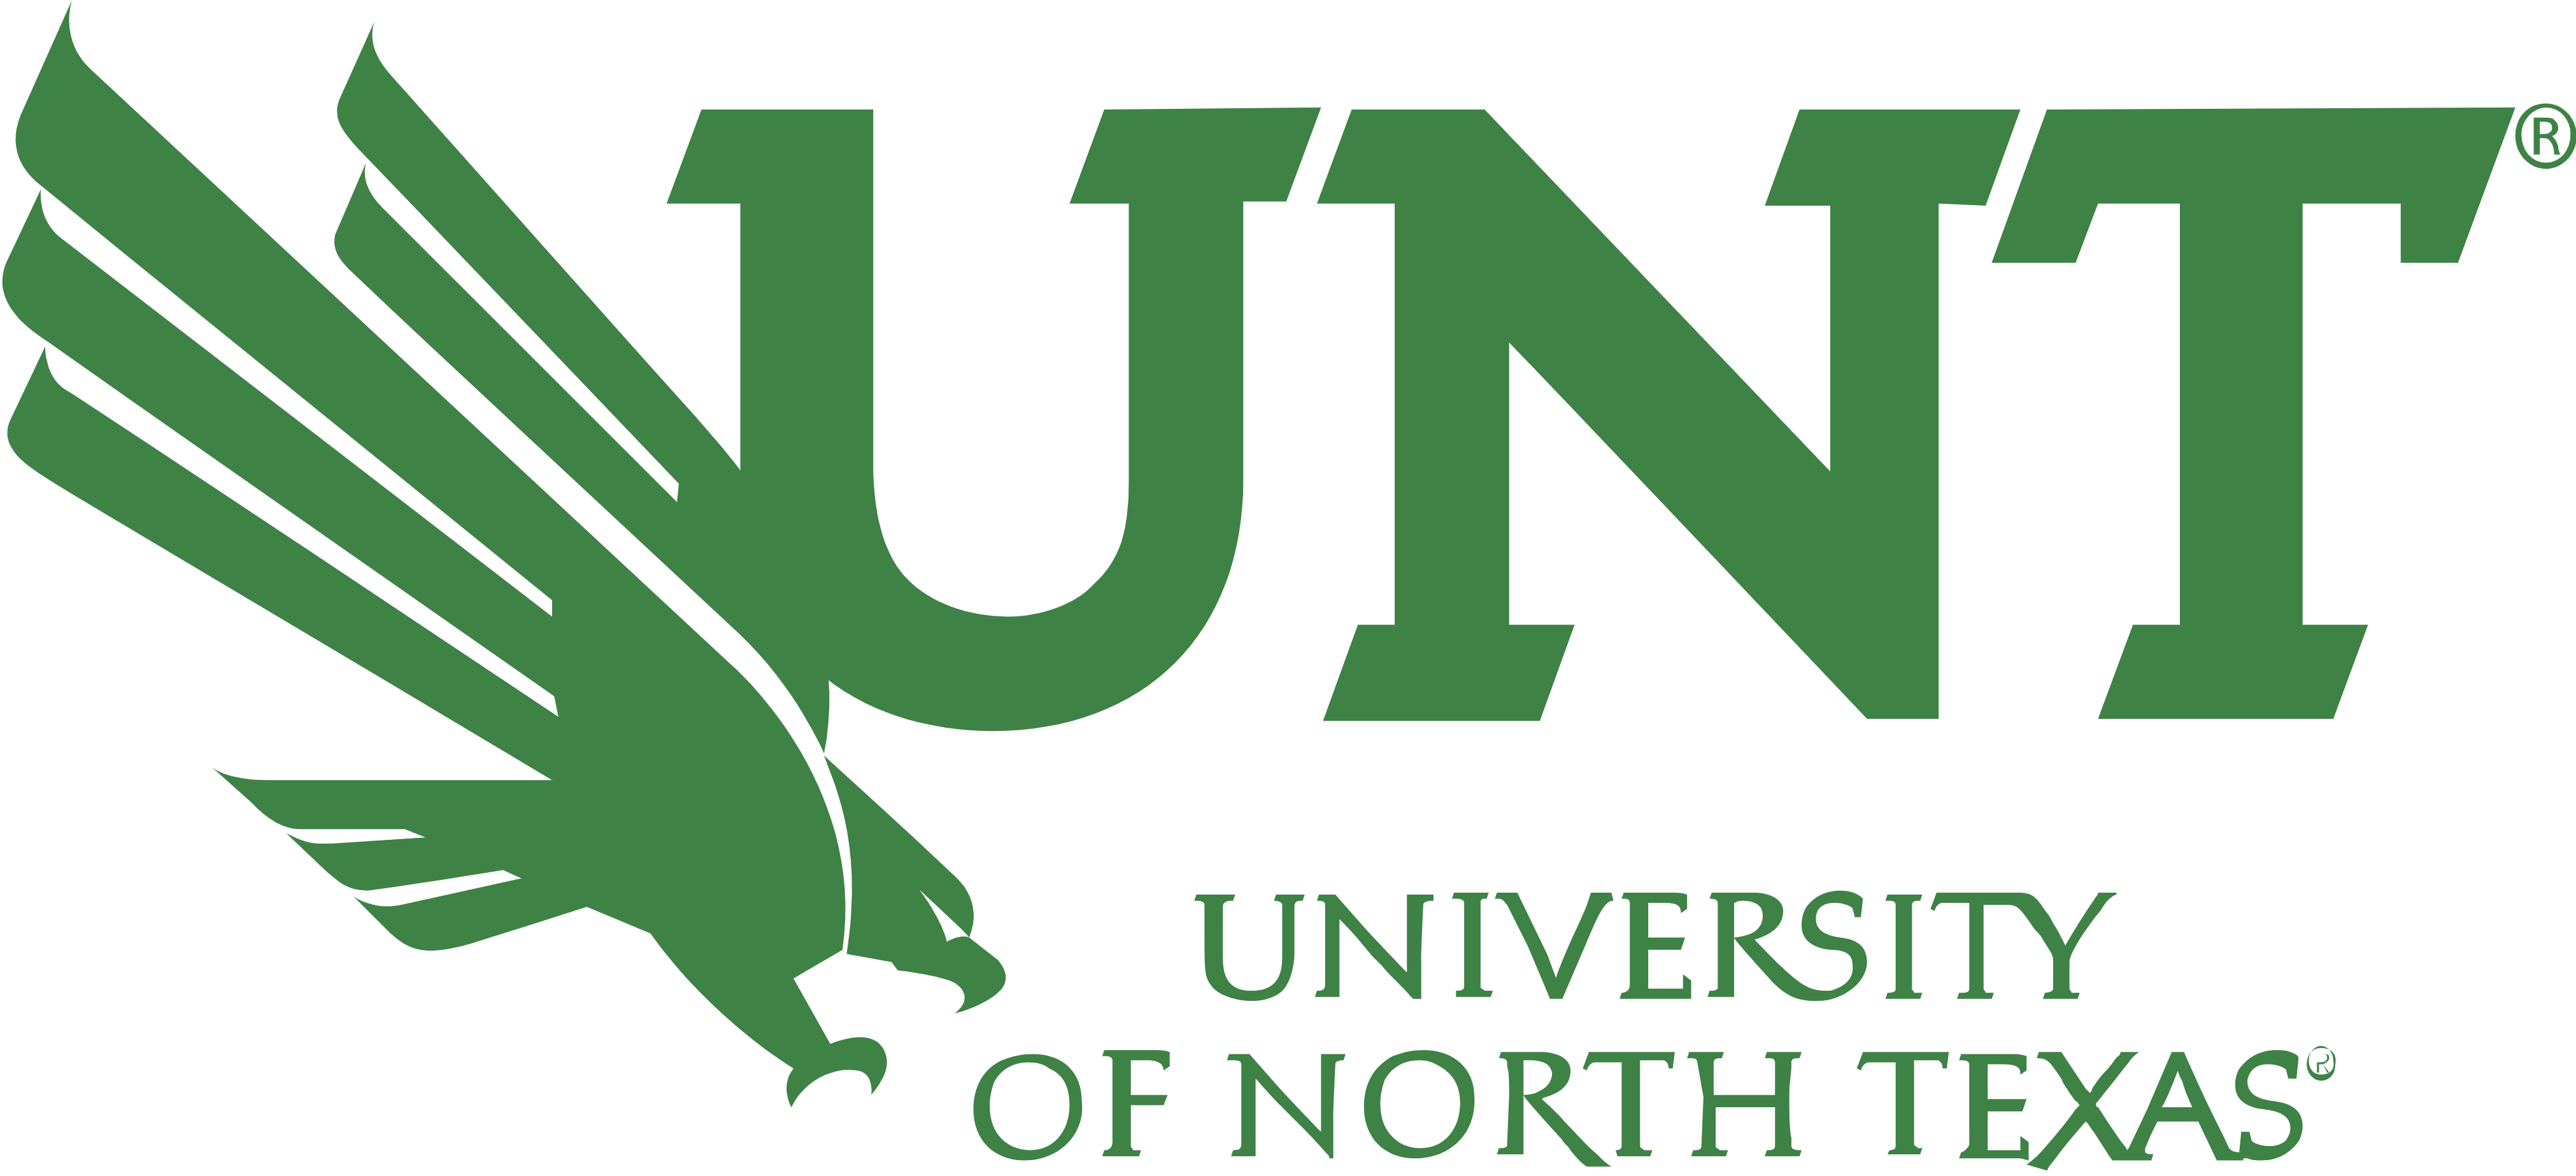 logo for our sponsor University of North Texas, University Libraries